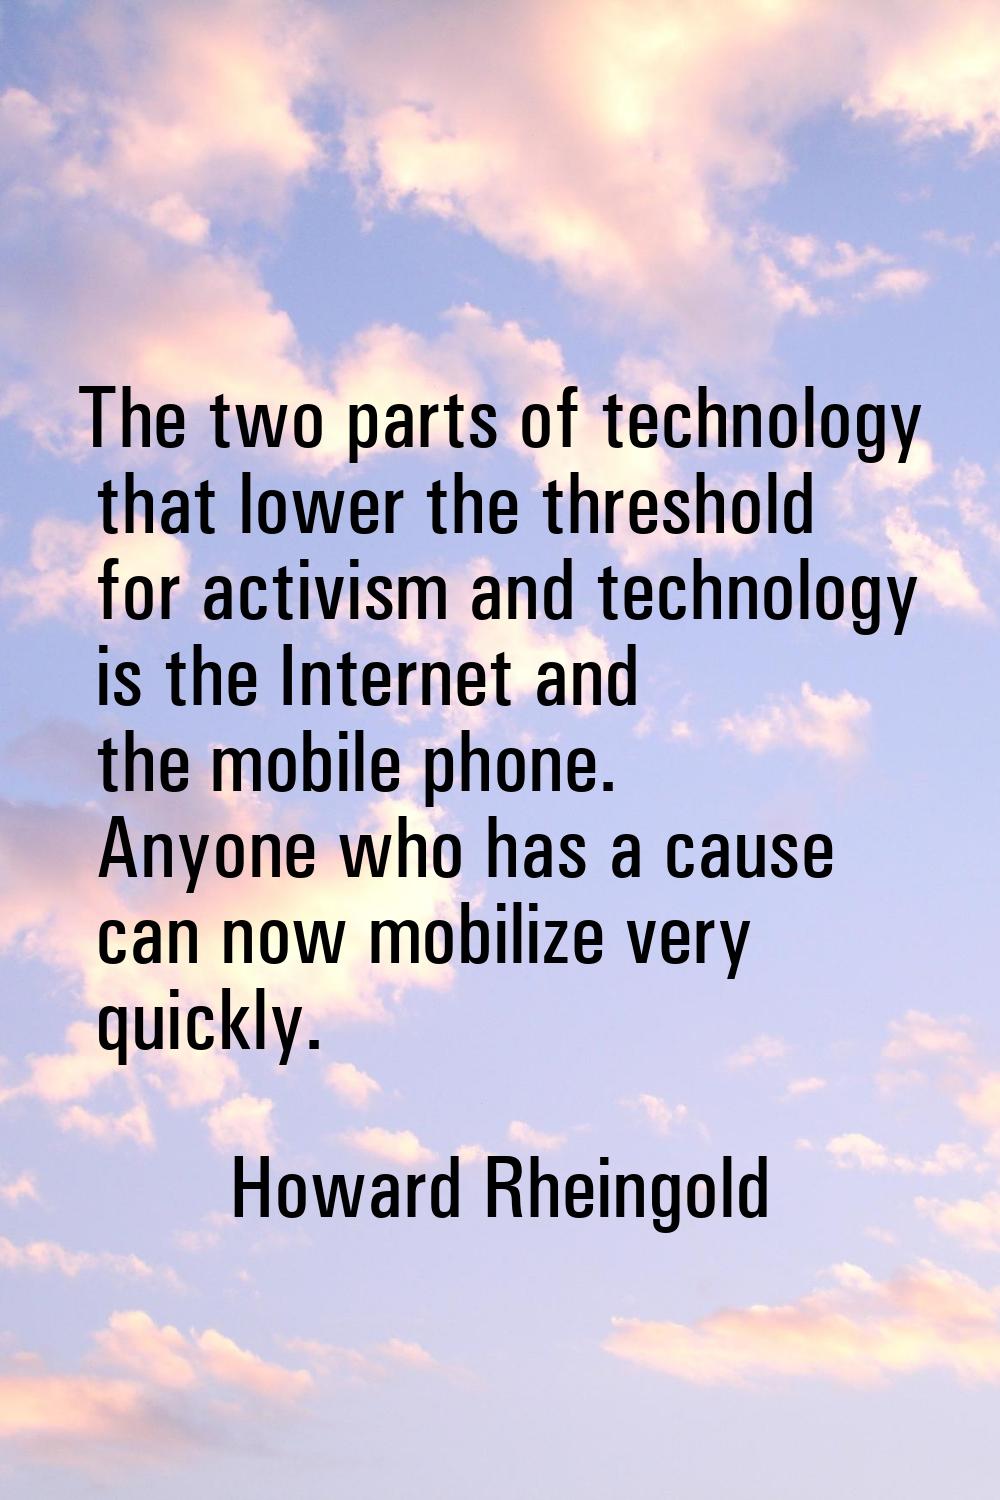 The two parts of technology that lower the threshold for activism and technology is the Internet an